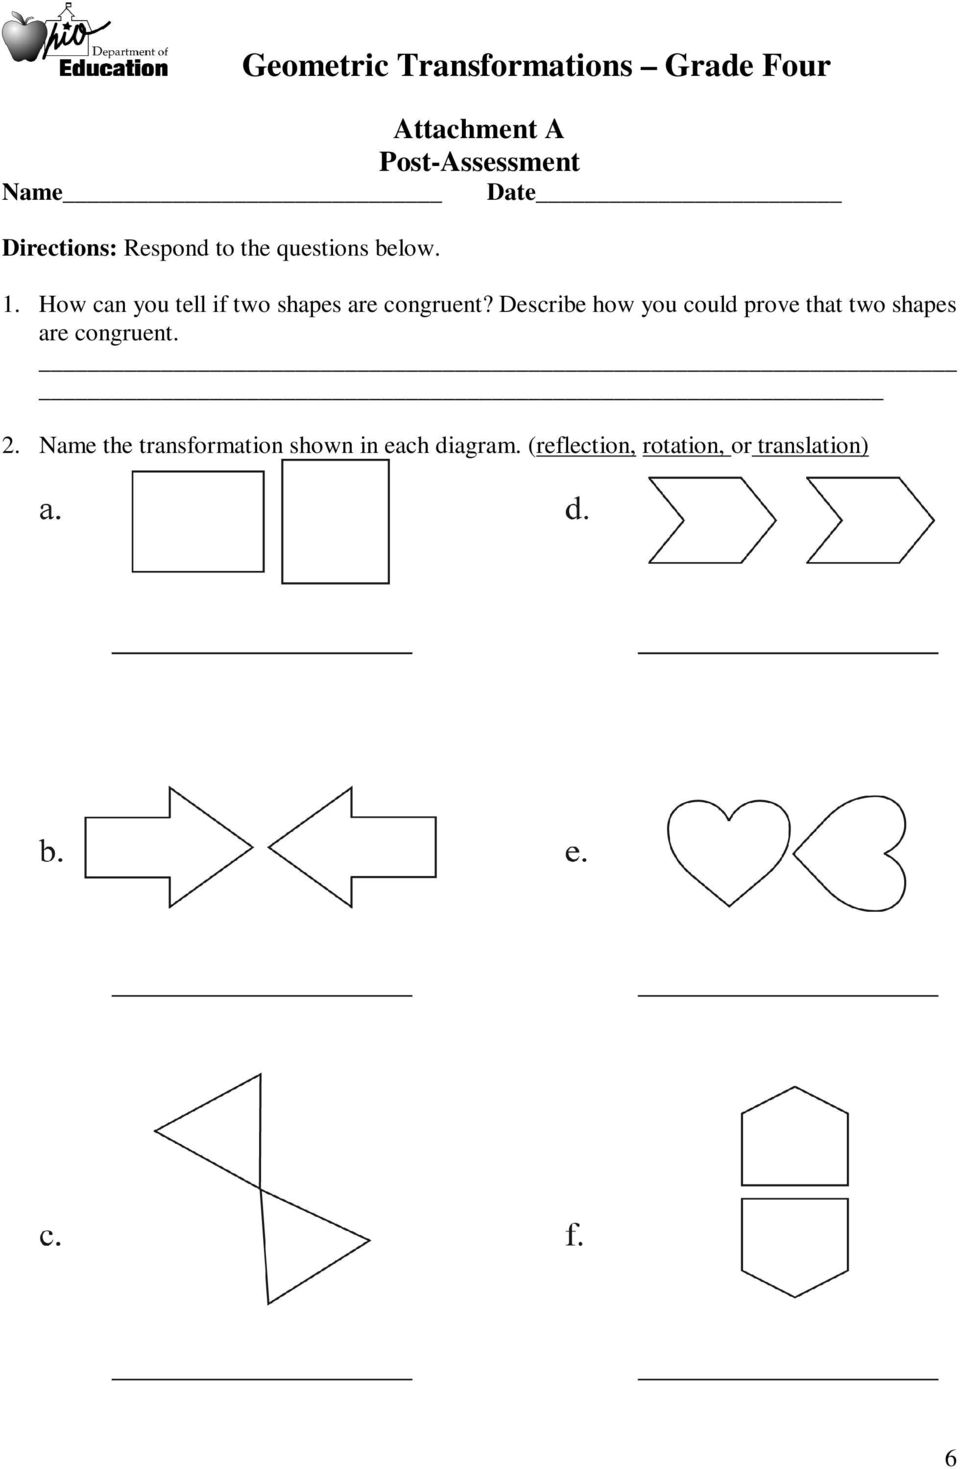 Describe how you could prove that two shapes are congruent. 2.